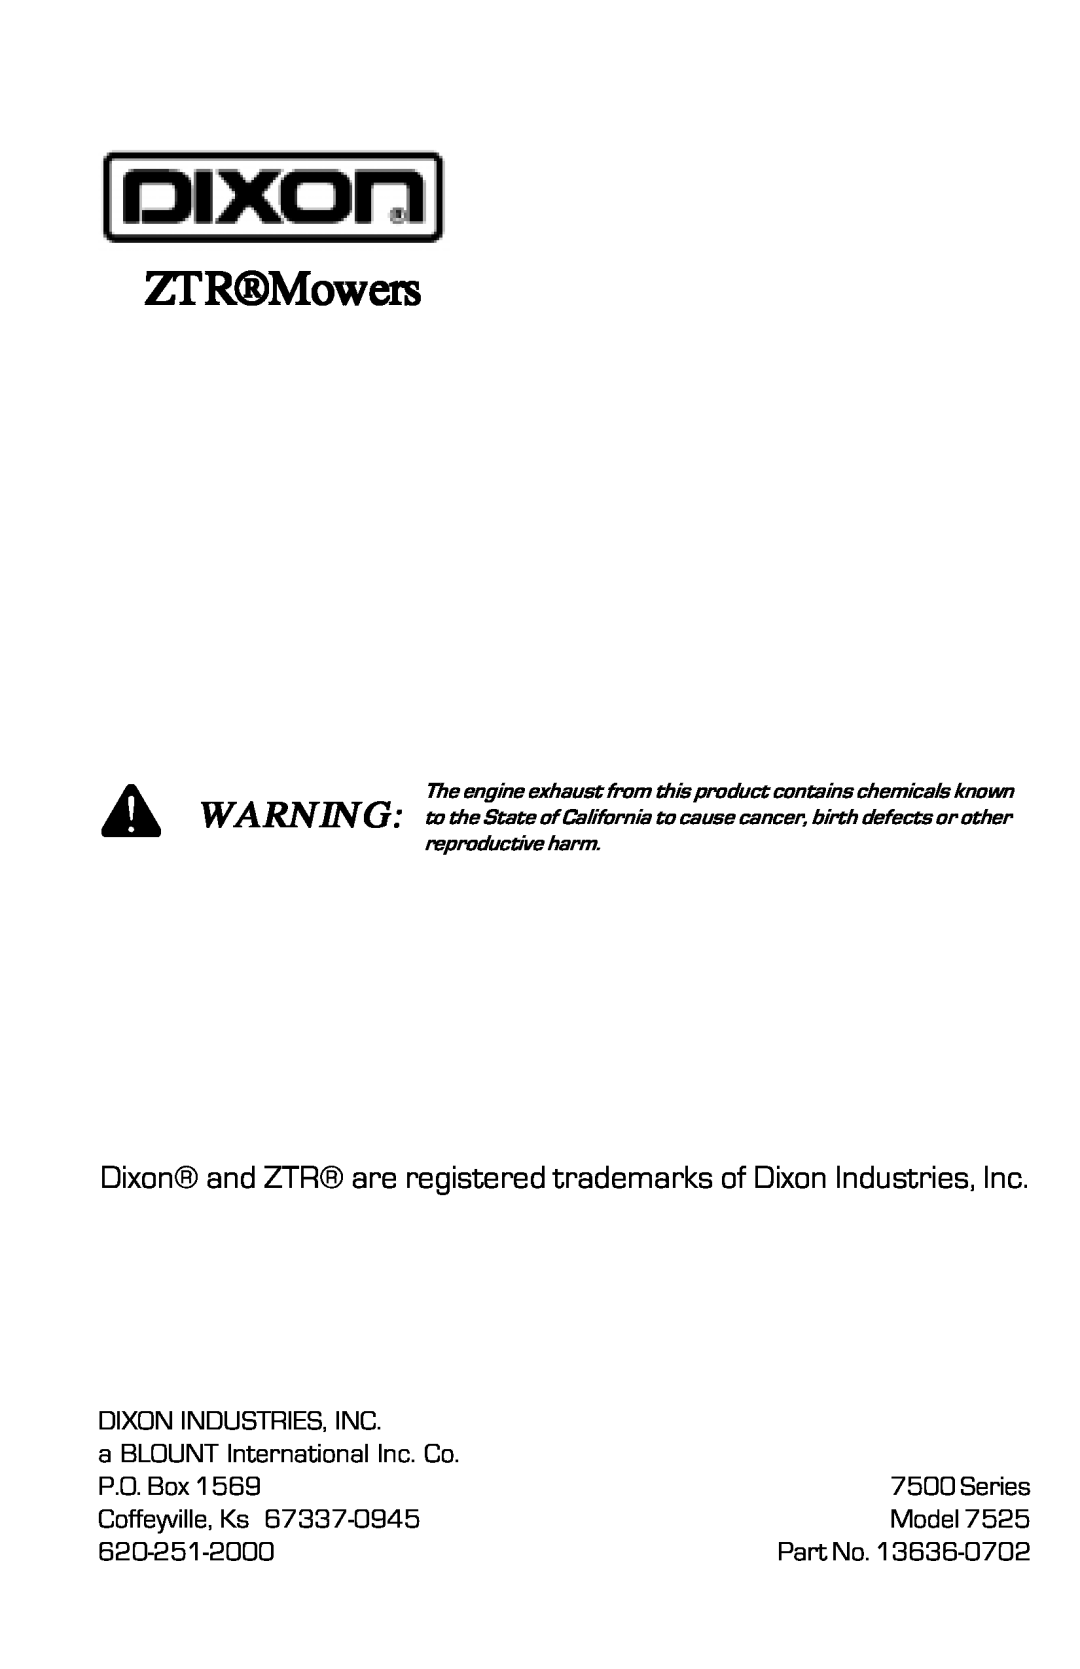 Dixon ZTR 7525, 13636-0702 ZTRMowers, Dixon and ZTR are registered trademarks of Dixon Industries, Inc, reproductive harm 